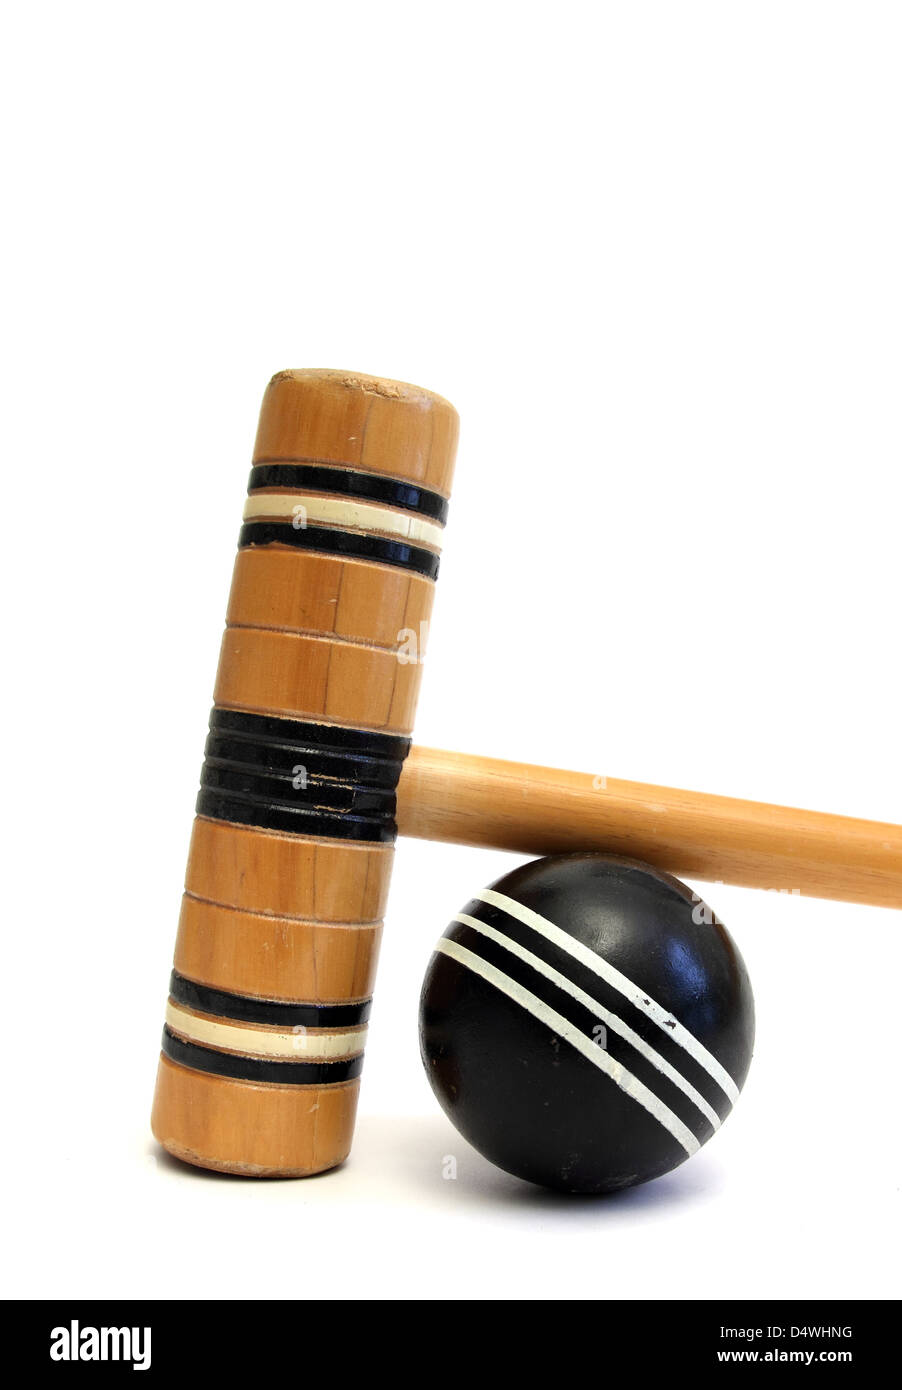 Croquet mallet Cut Out Stock Images & Pictures - Alamy